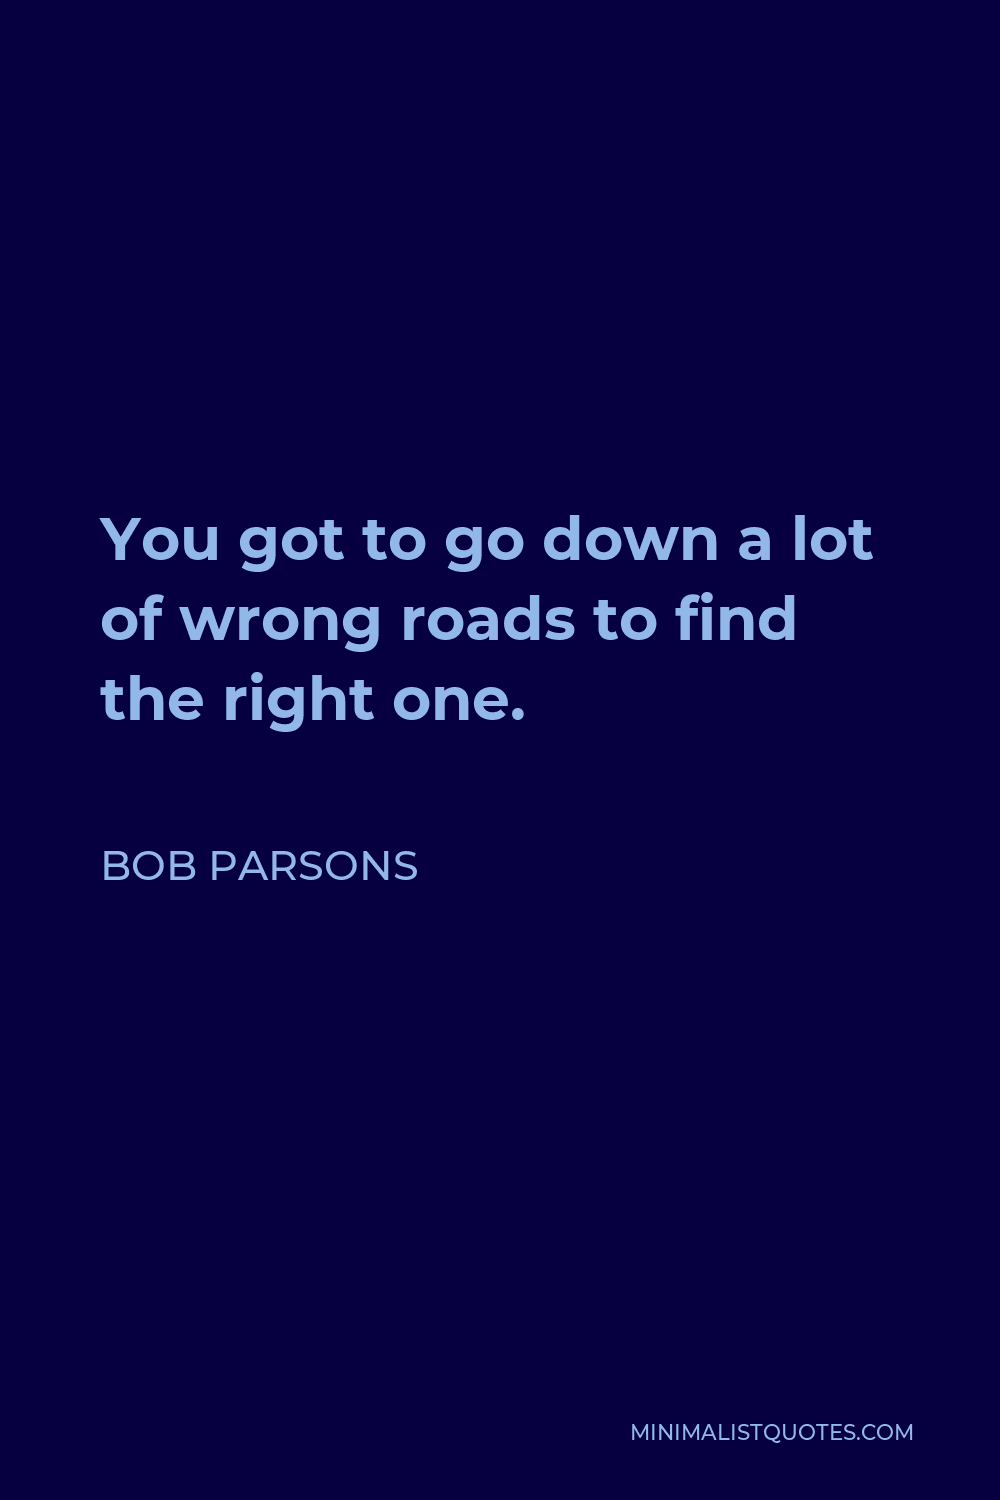 Bob Parsons Quote - You got to go down a lot of wrong roads to find the right one.